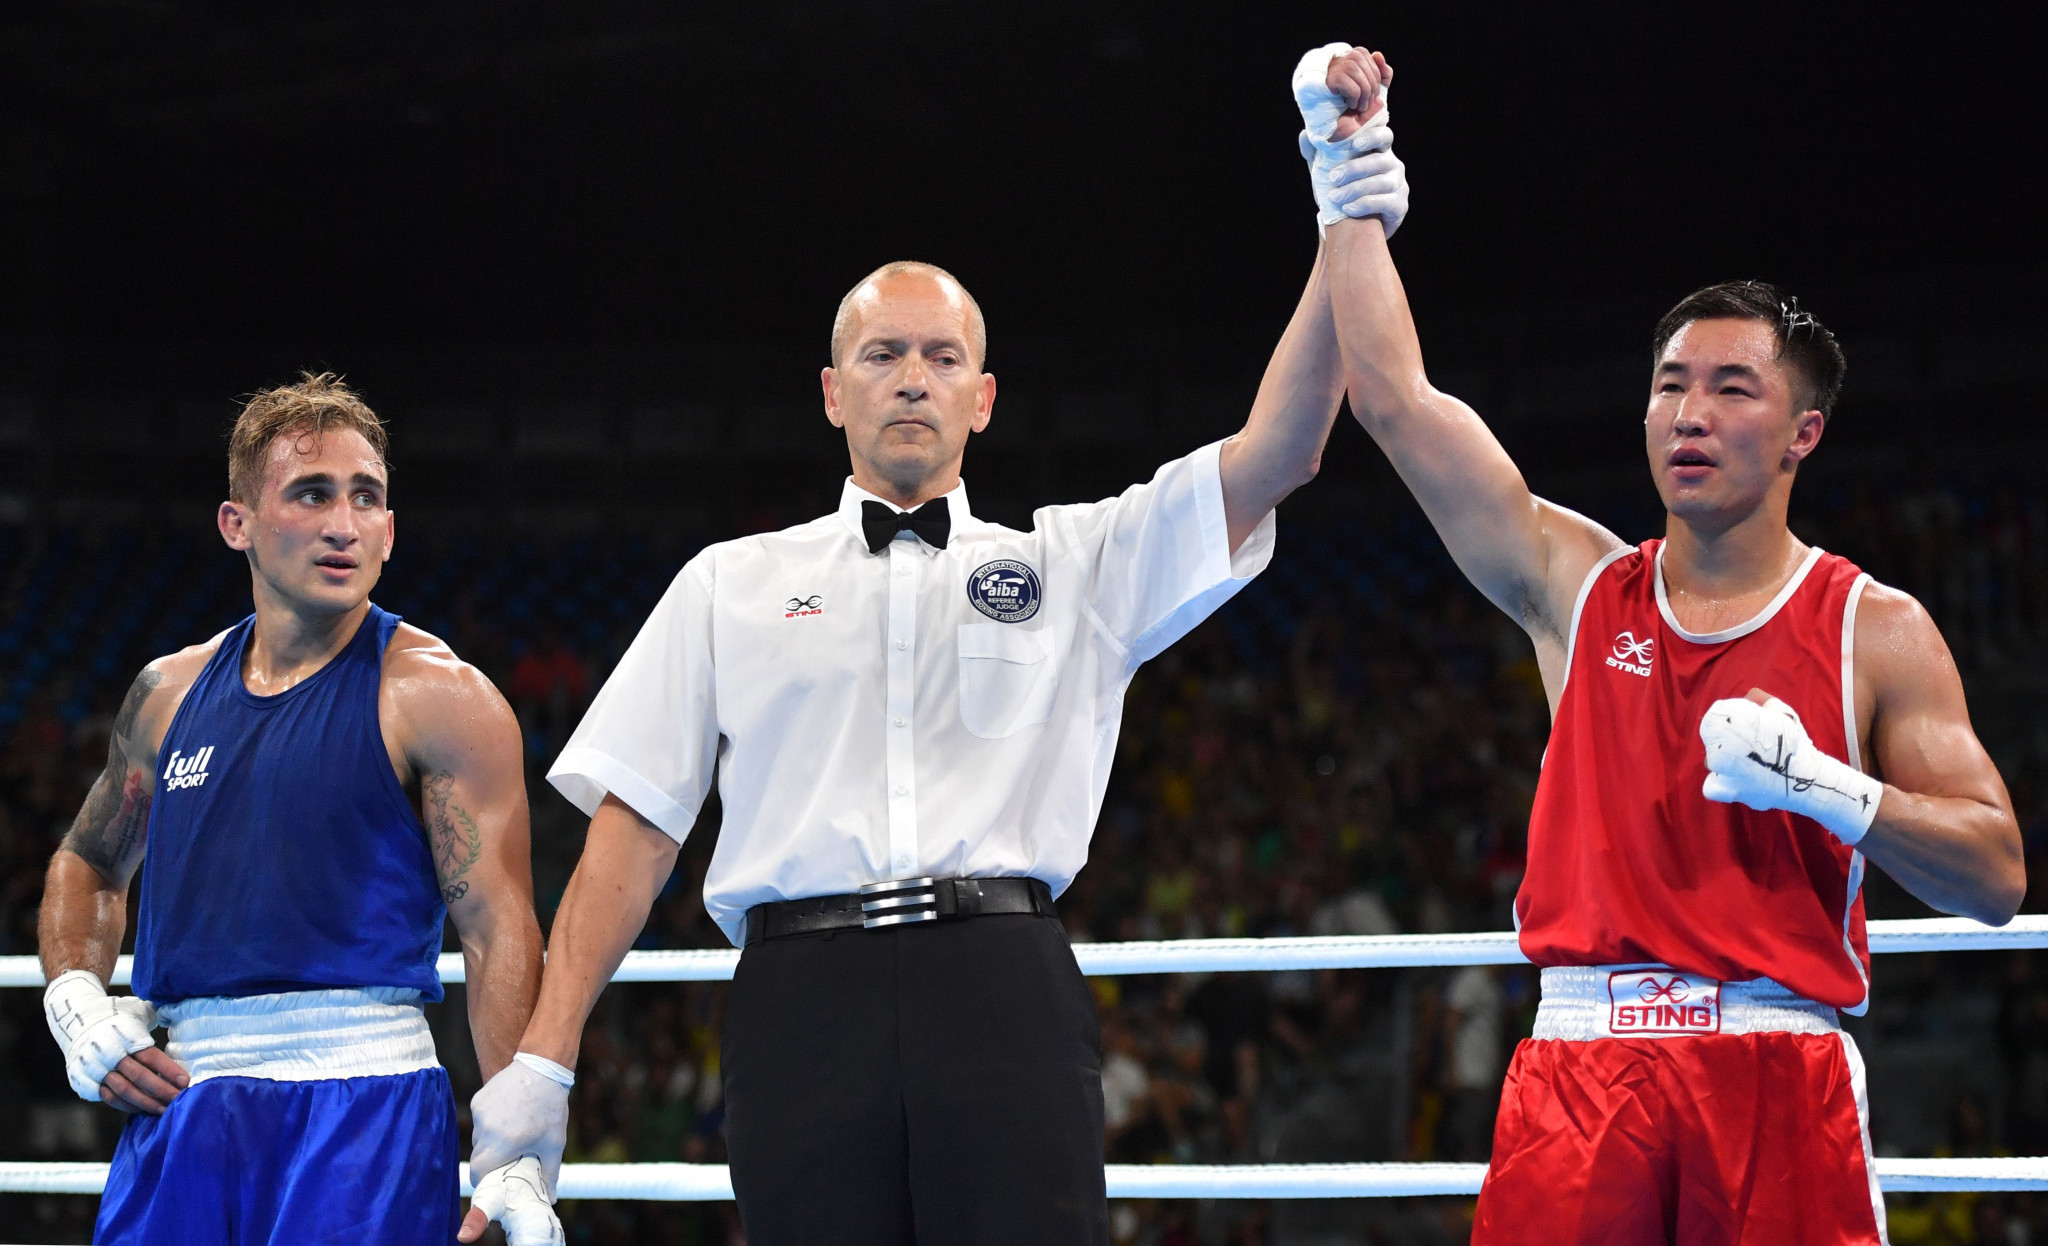 A boxing referee raises the winner's hand at the Rio 2016 Olympics ©Getty Images